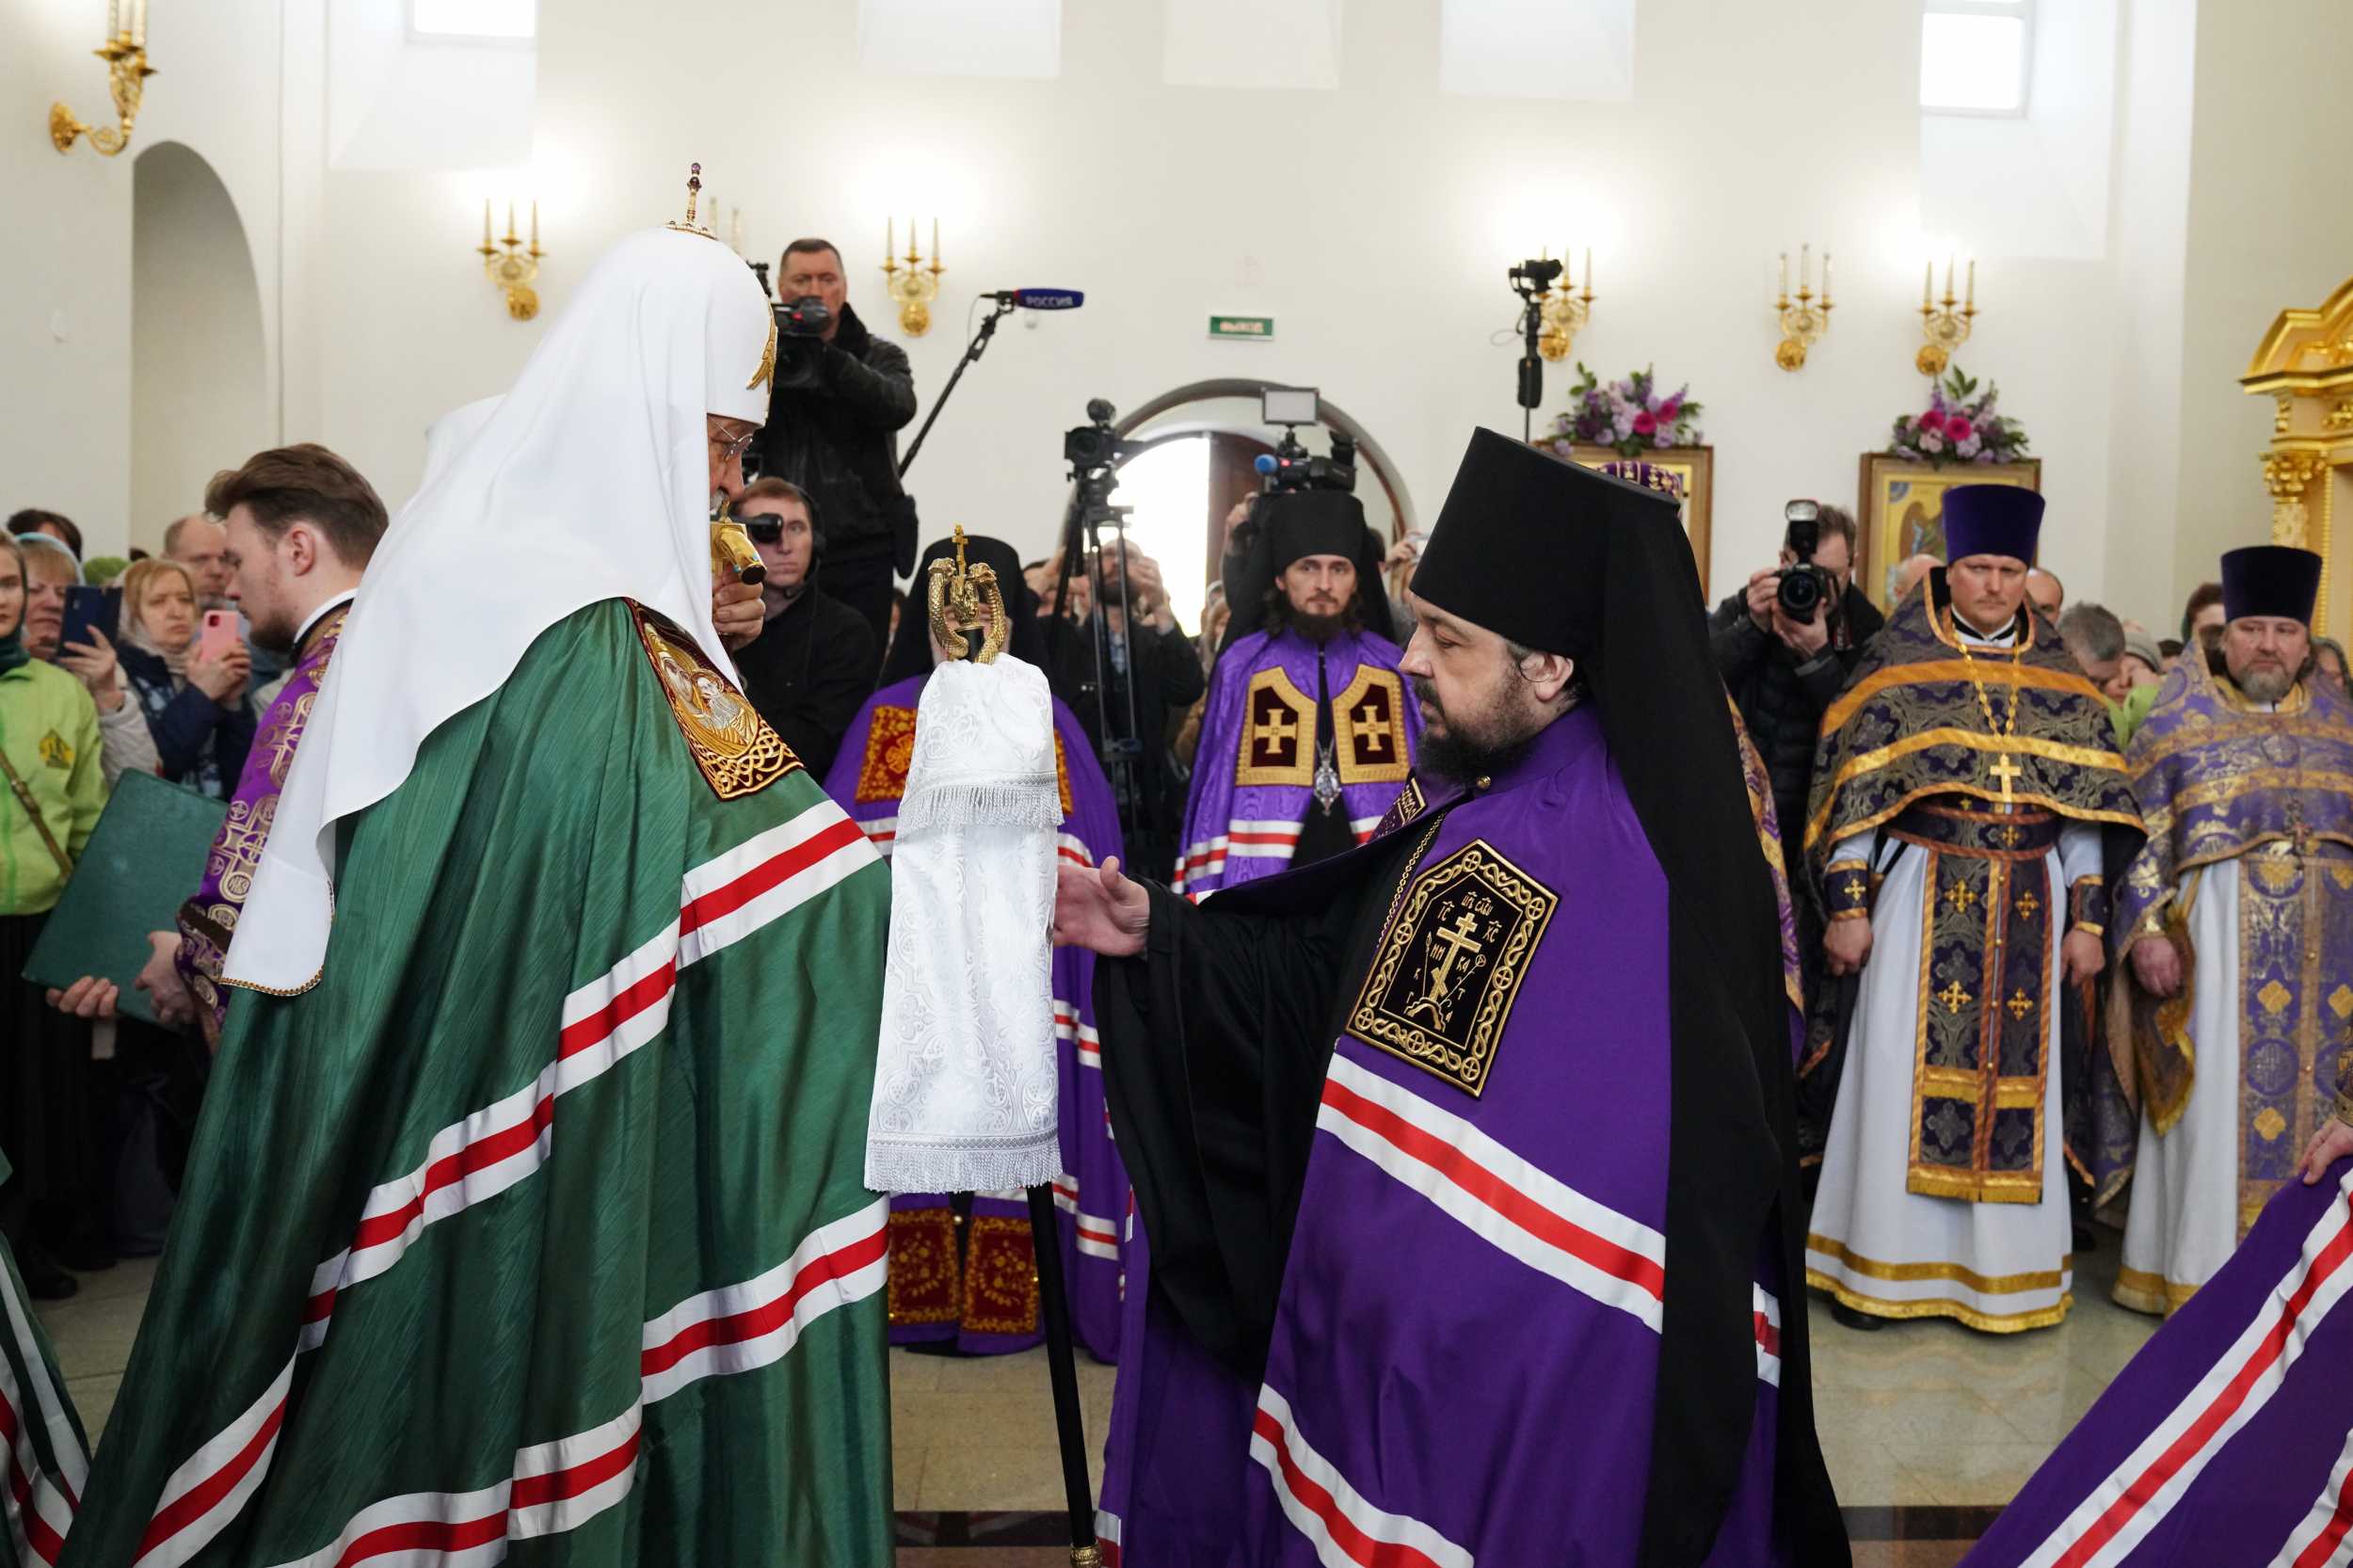 Archimandrite Auxentius (Abrazhey) Consecrated as the Bishop of Nesviz, Vicar of the Patriarchal Exarch of All Belarus